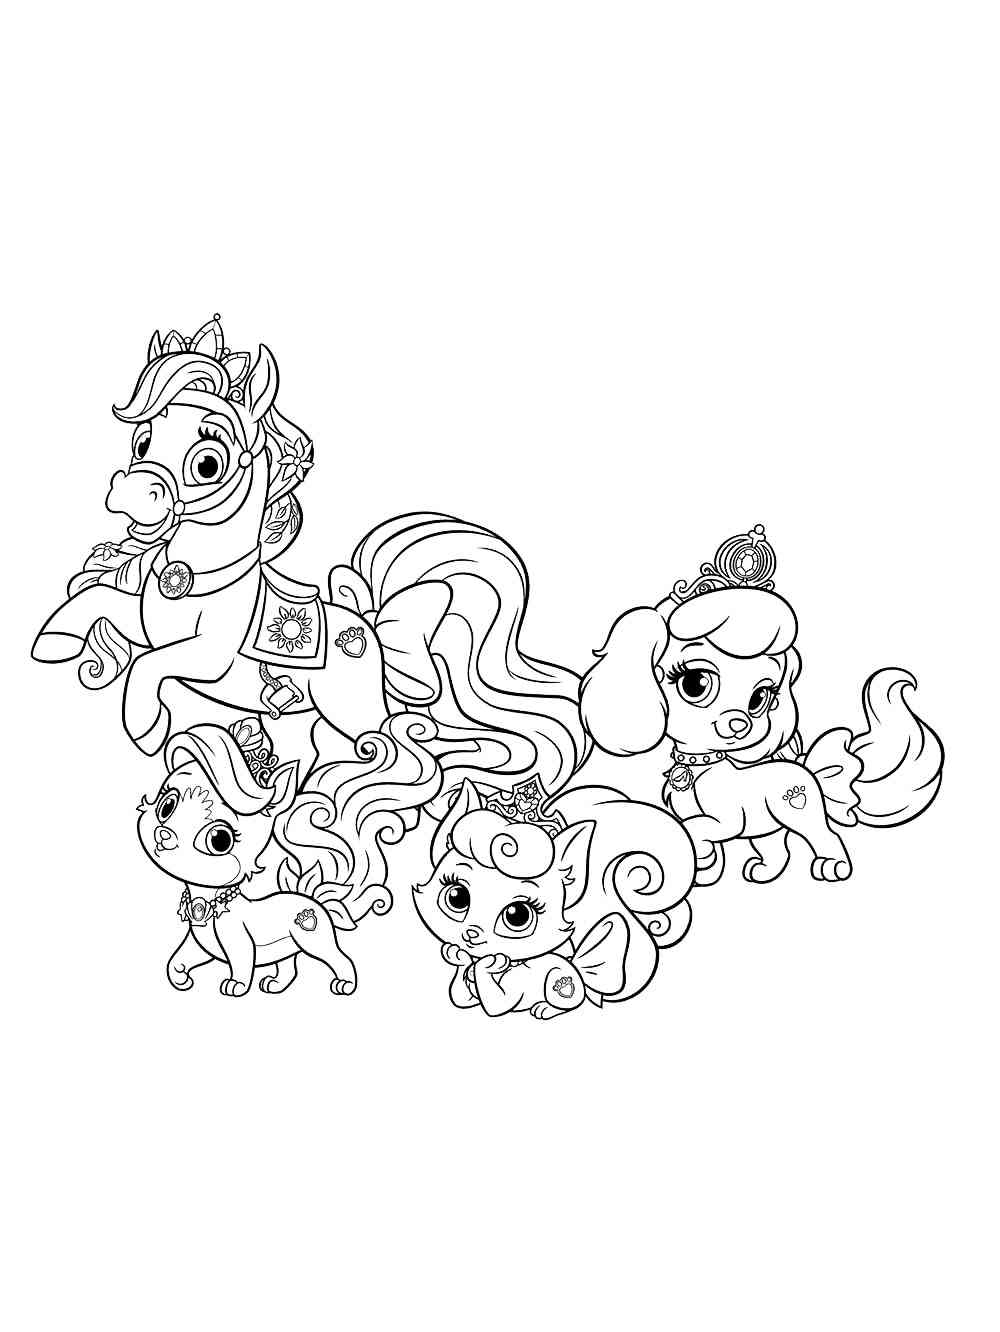 Palace Pets 35 coloring page